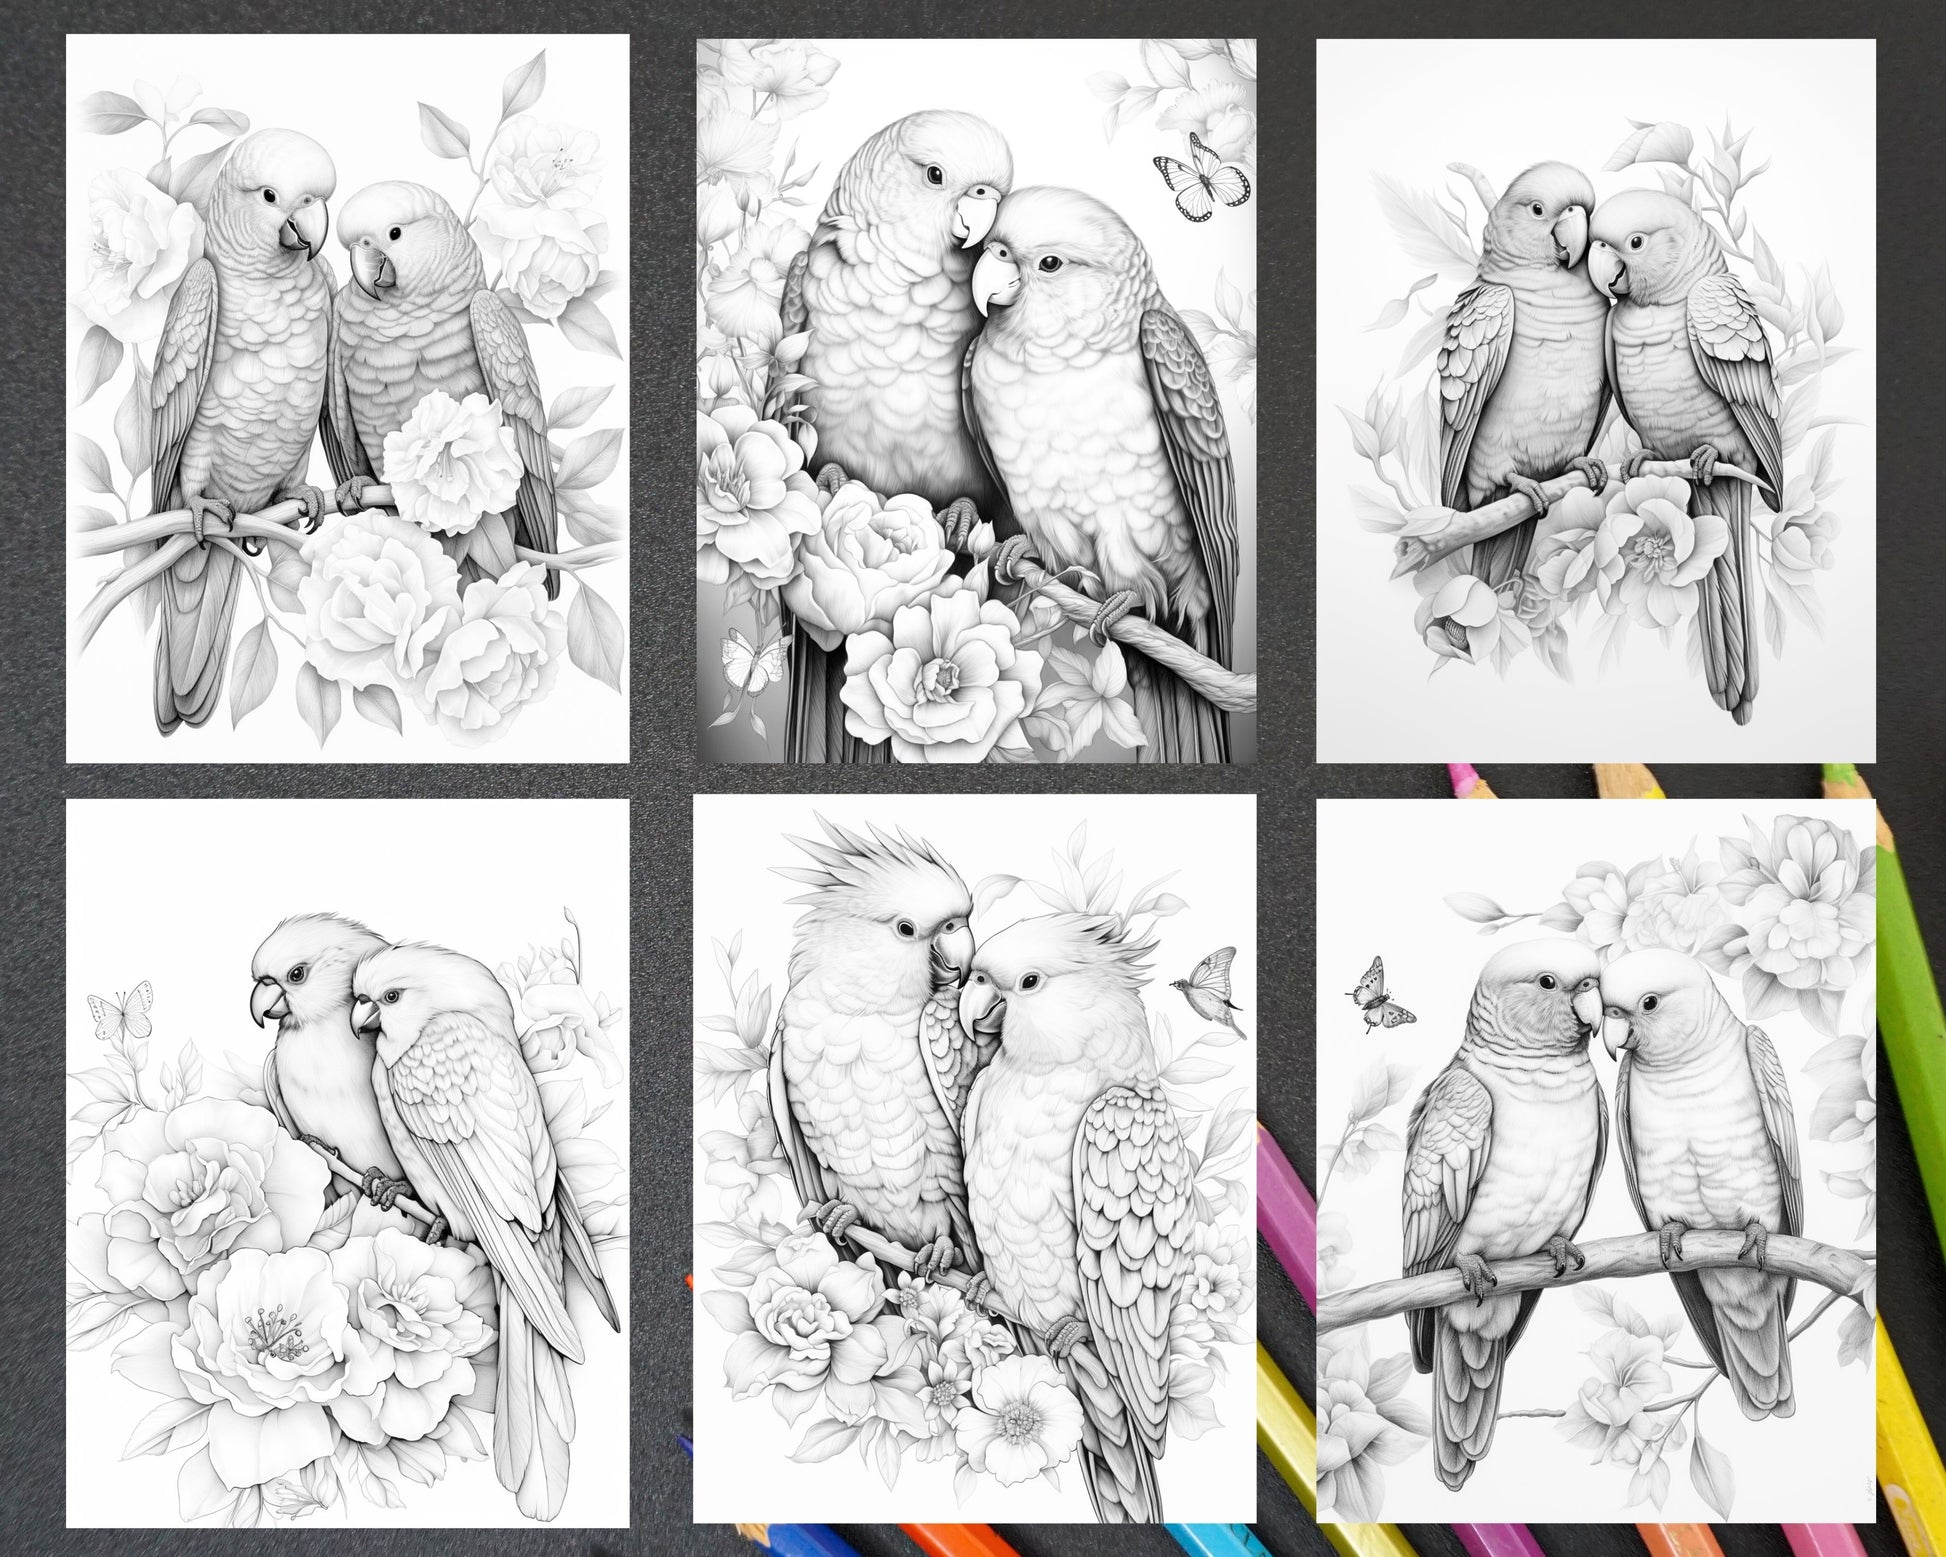 Lovebird Coloring Pages for Adults, Adult Coloring Book Download, Bird Coloring Pages, Animal Coloring Pages, Flower Coloring Pages, Floral Coloring Pages, Grayscale Coloring Pages